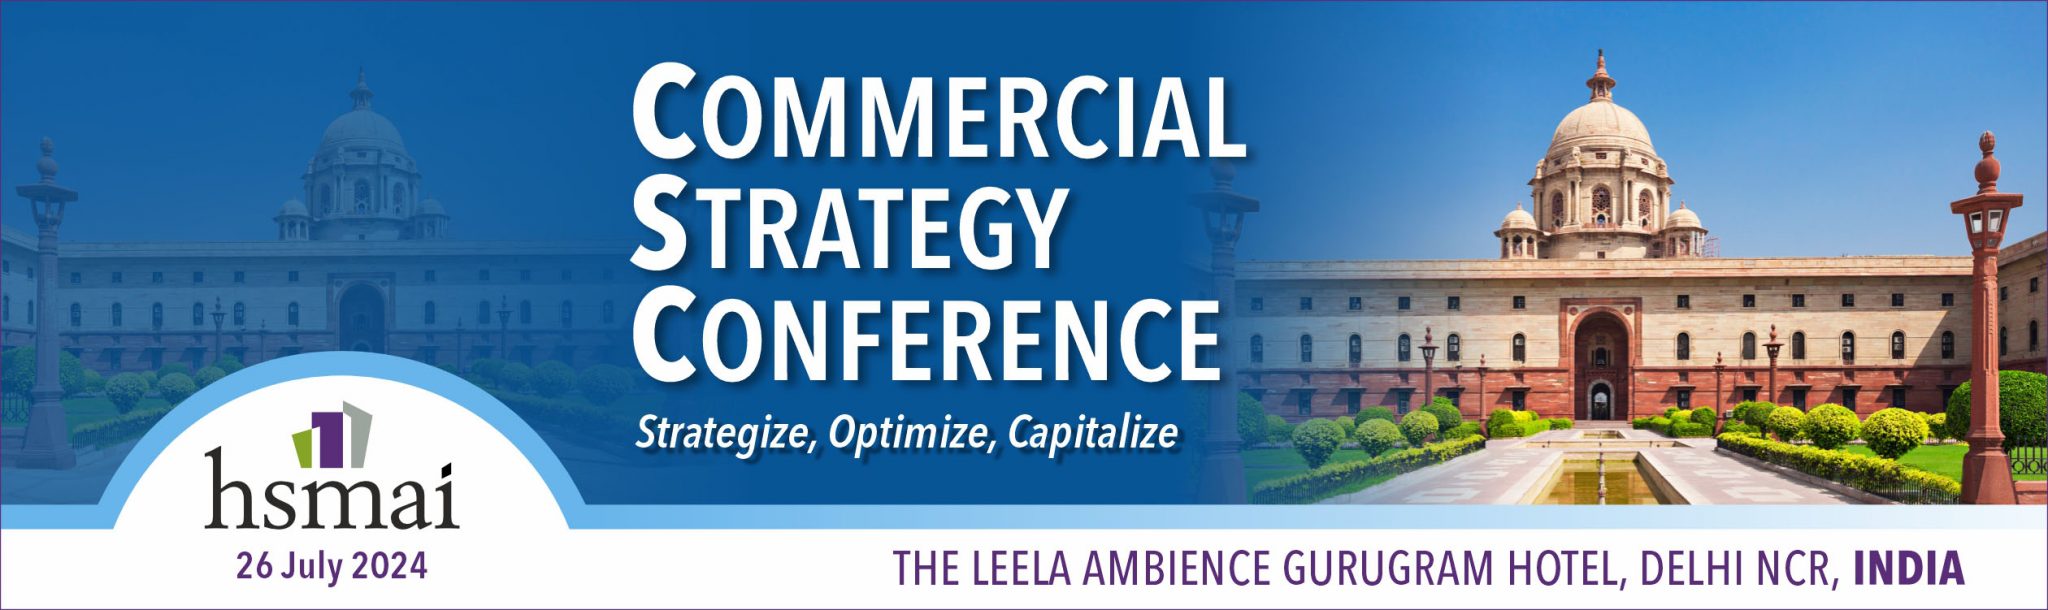 HSMAI Commercial Strategy Conference 2024 – India: Awards